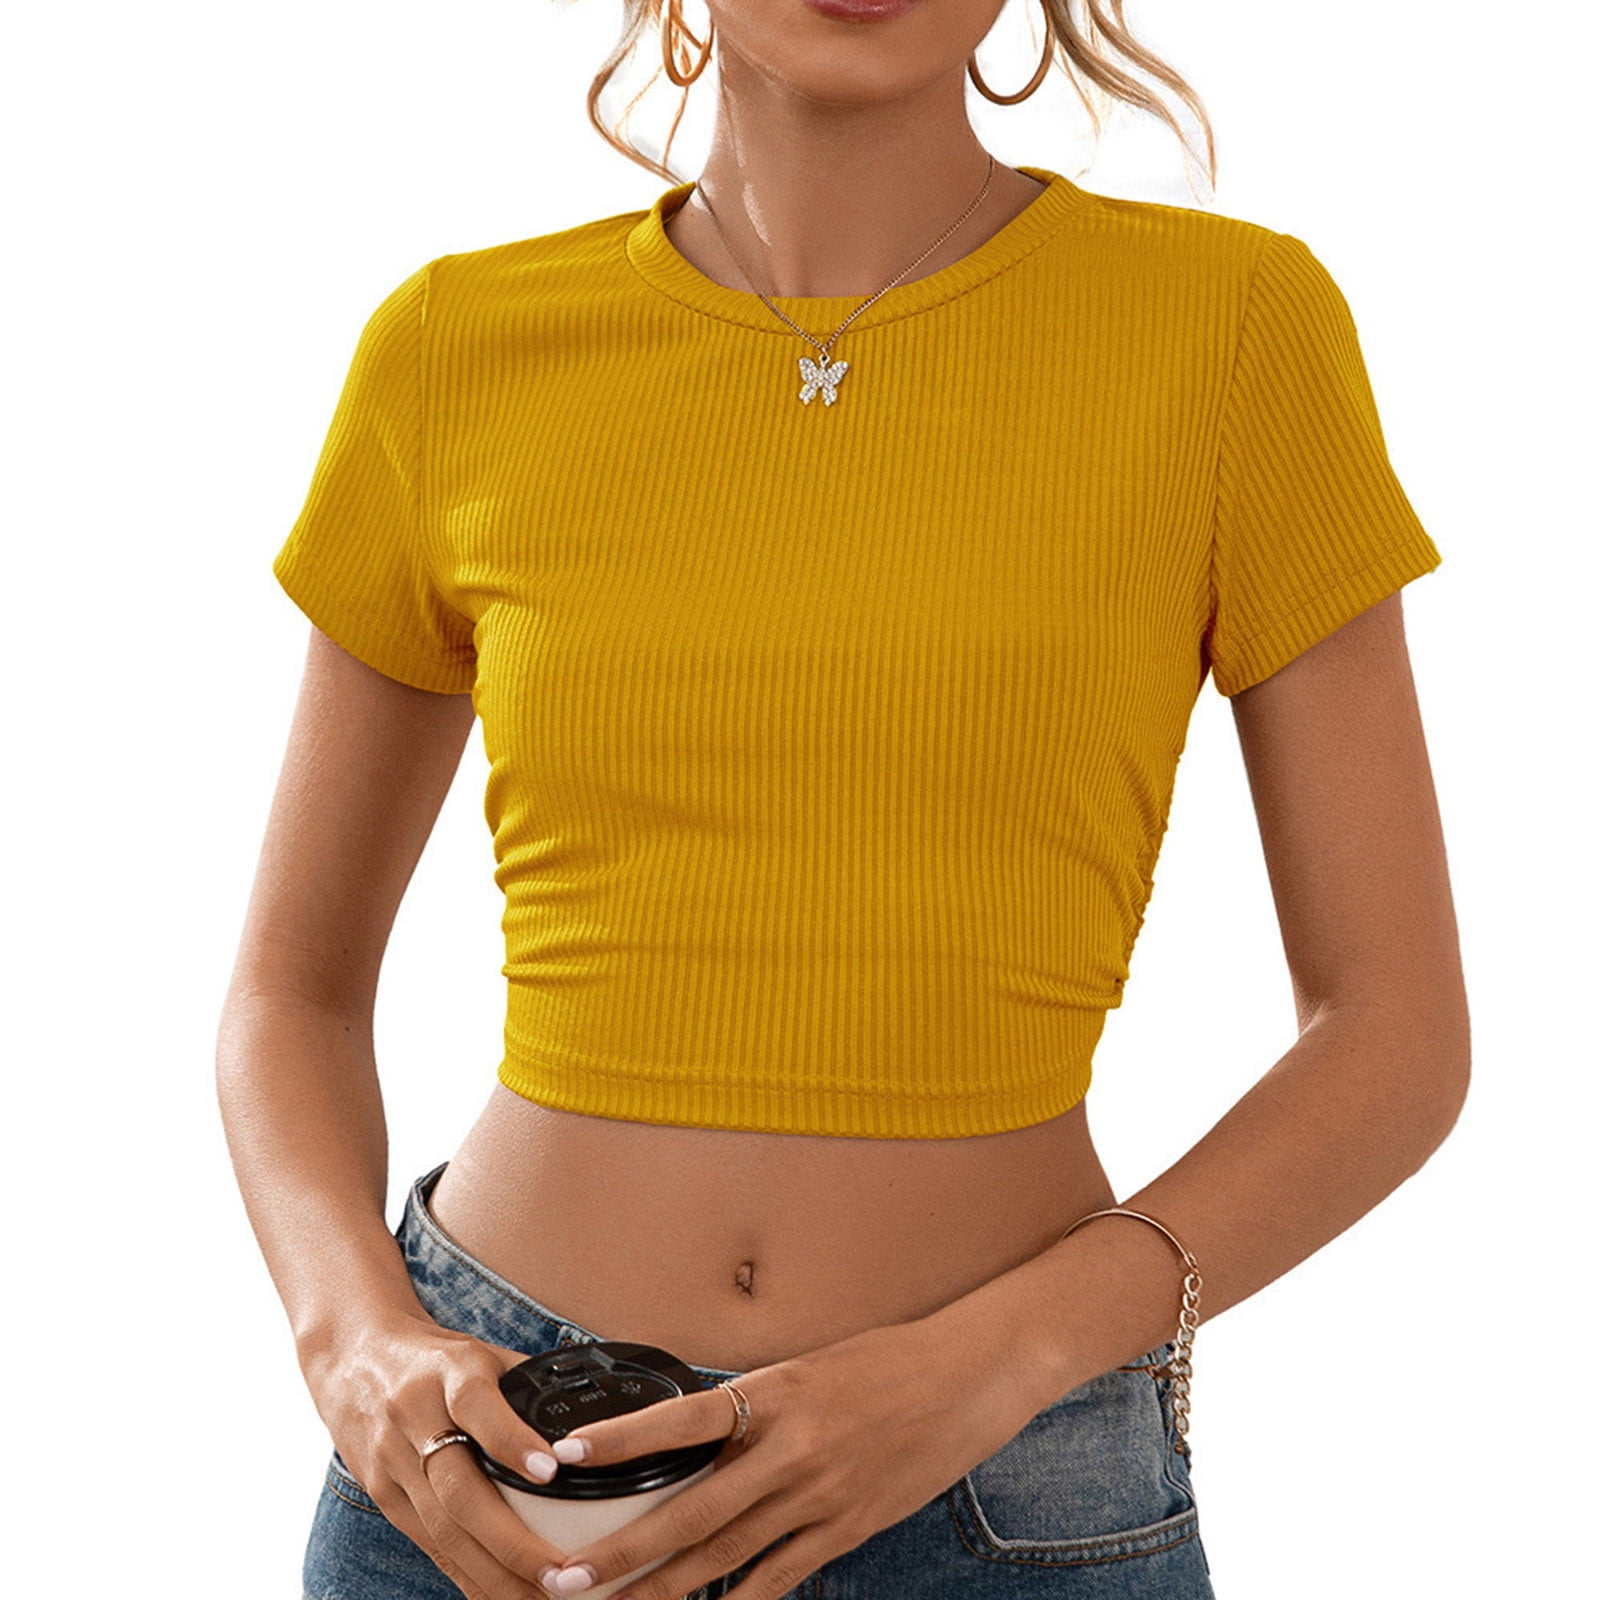 Workout Crewneck Knit Tee Ribbed Crop Sleeve Top Solid T-Shirt(Yellow,M) Short Summer Casual Shirts Discount Blouse RQYYD Fit Basic Women\'s Slim Teen